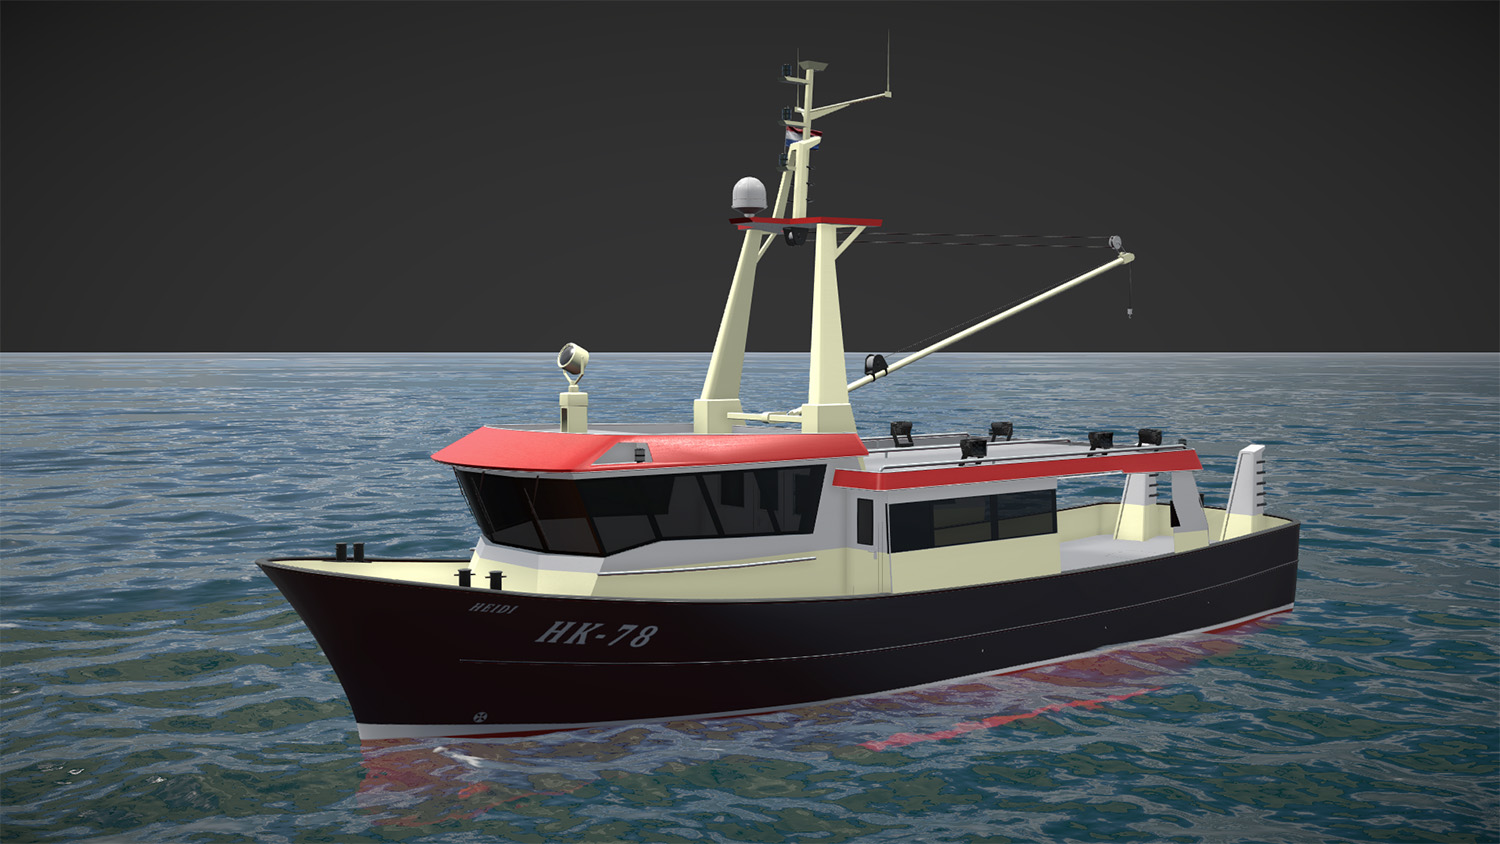 How to order 3D viewer interactive model of a ship or vessel